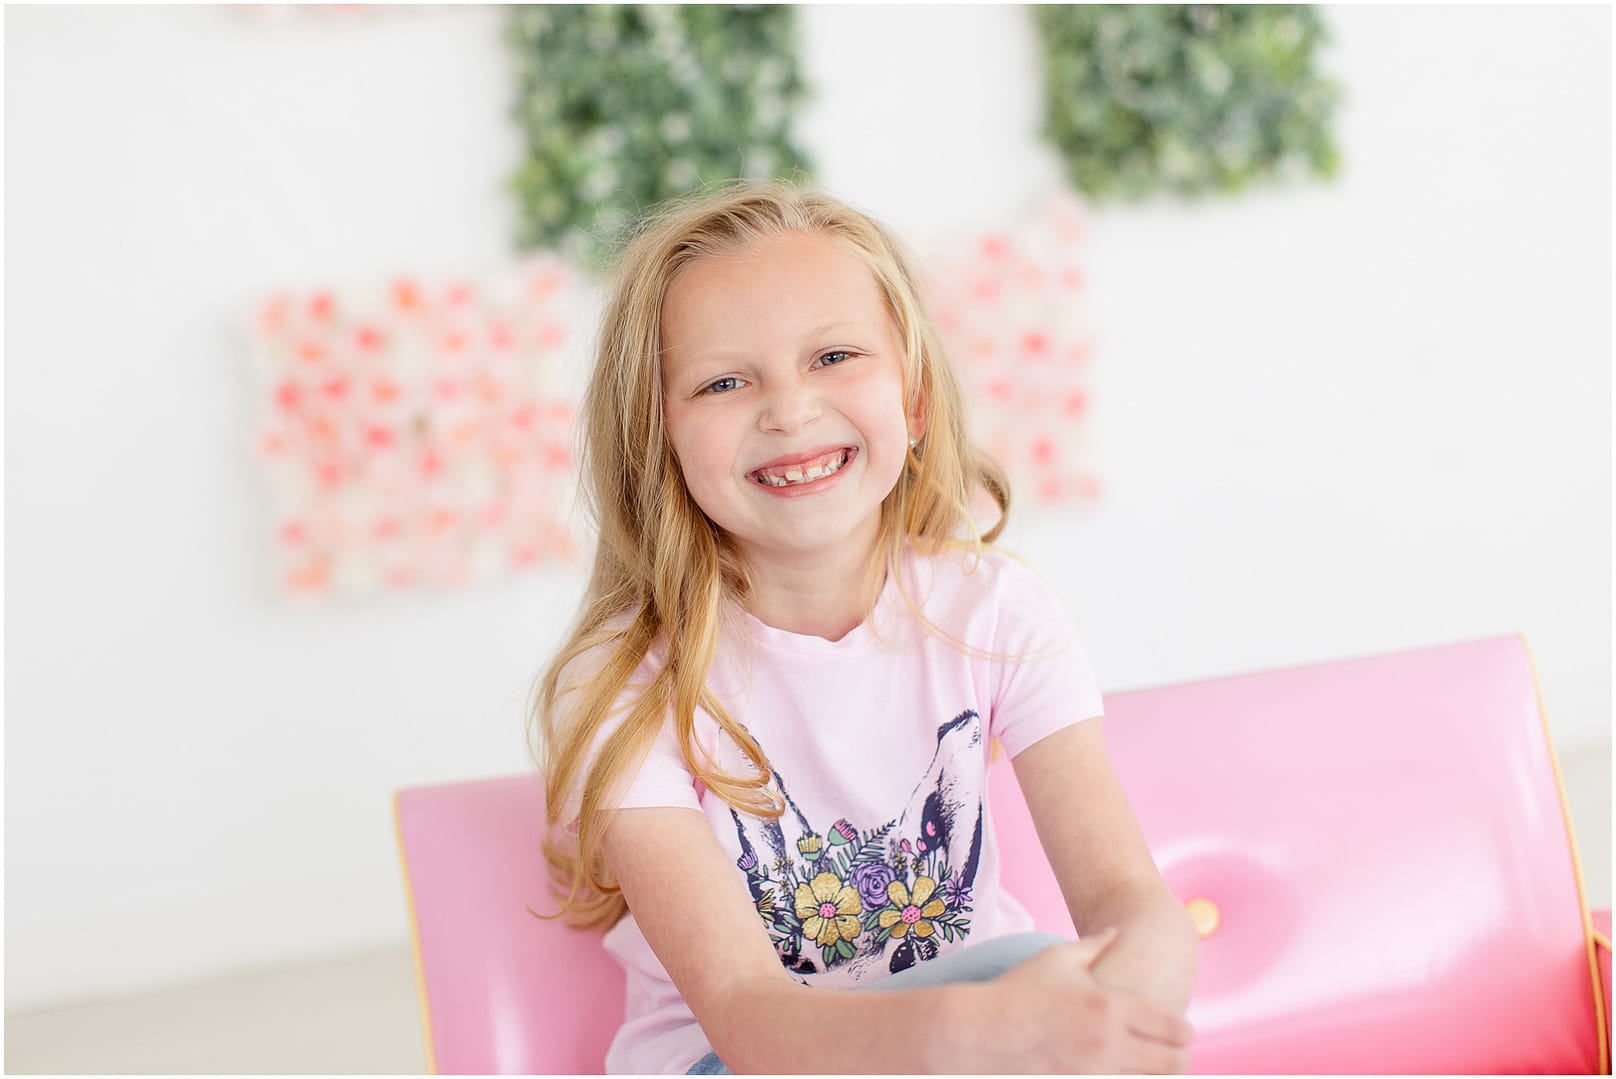 Blonde hair girl smiles in pink shirt. Photo by Tiffany Hix Photography.